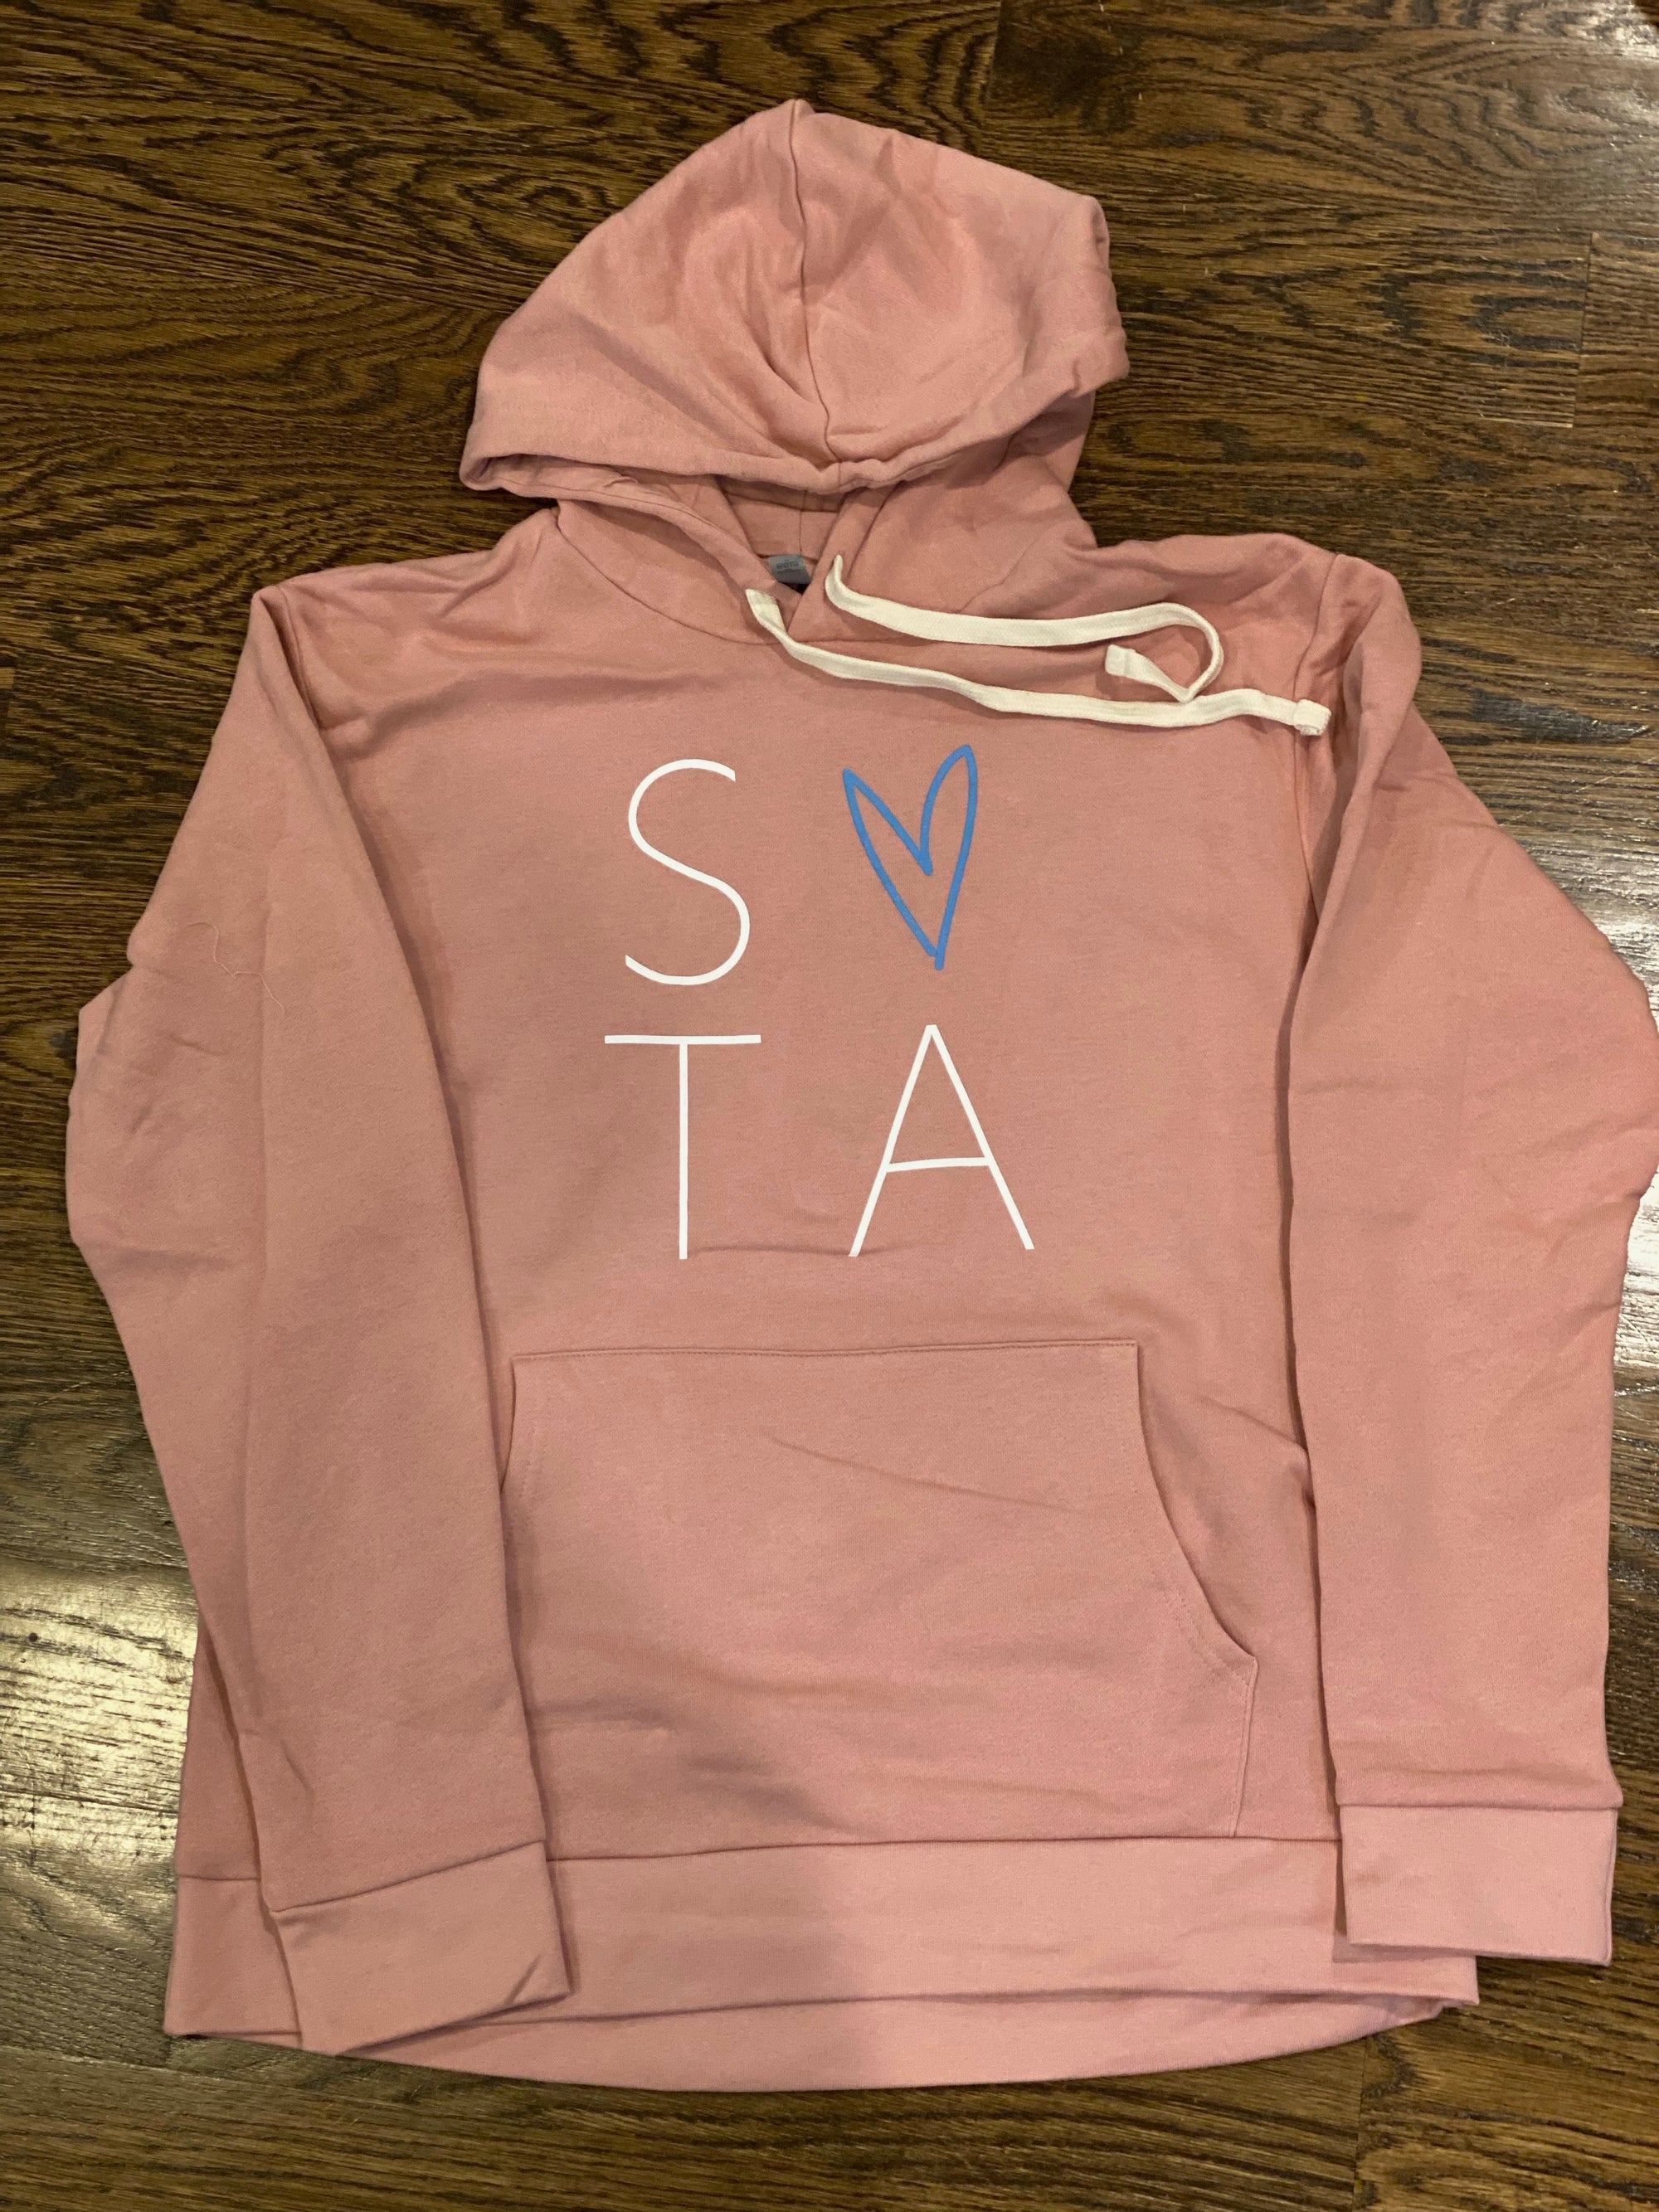 Share Love Hoodie in Pink with Blue Heart - Share Love, That's All